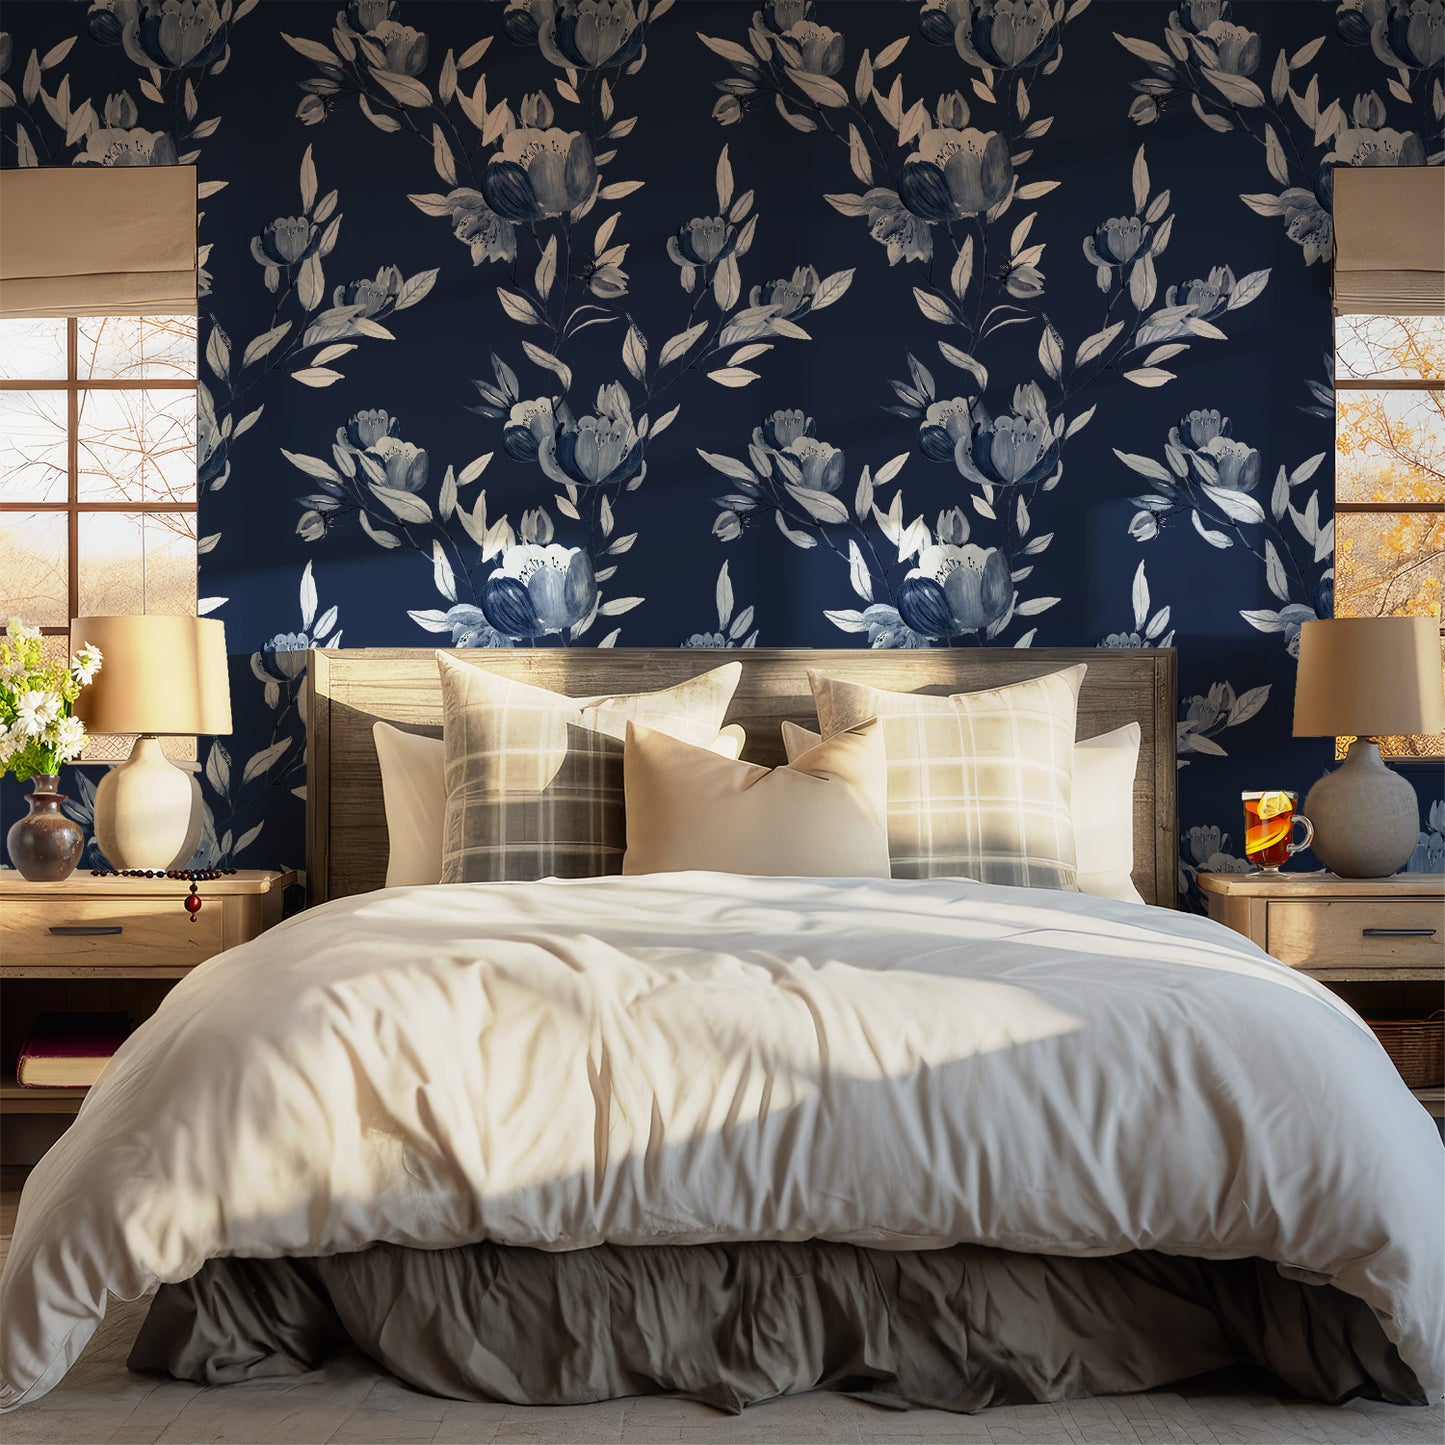 Indigo Blue Floral Peel and Stick Removable Wallpaper | Canada